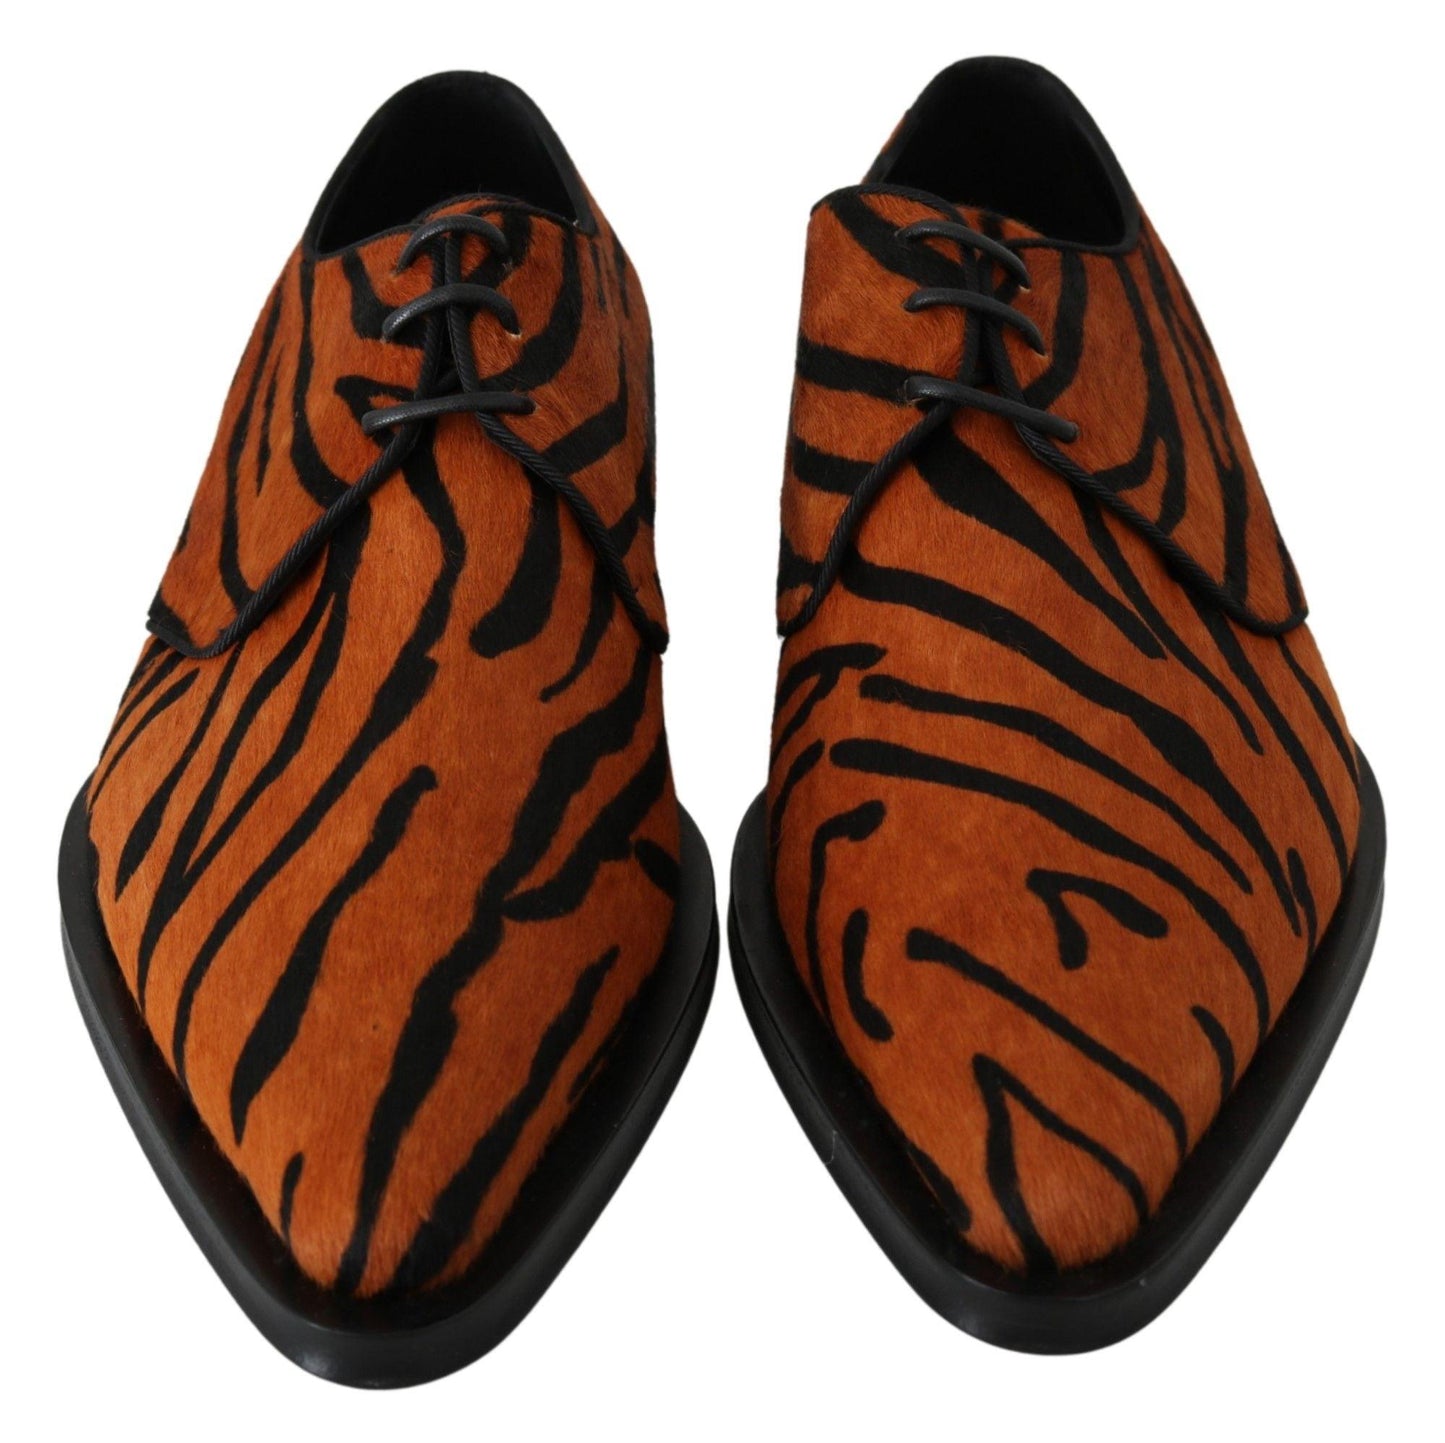 Dolce & Gabbana Tiger Pattern Dress Shoes with Pony Hair - PER.FASHION